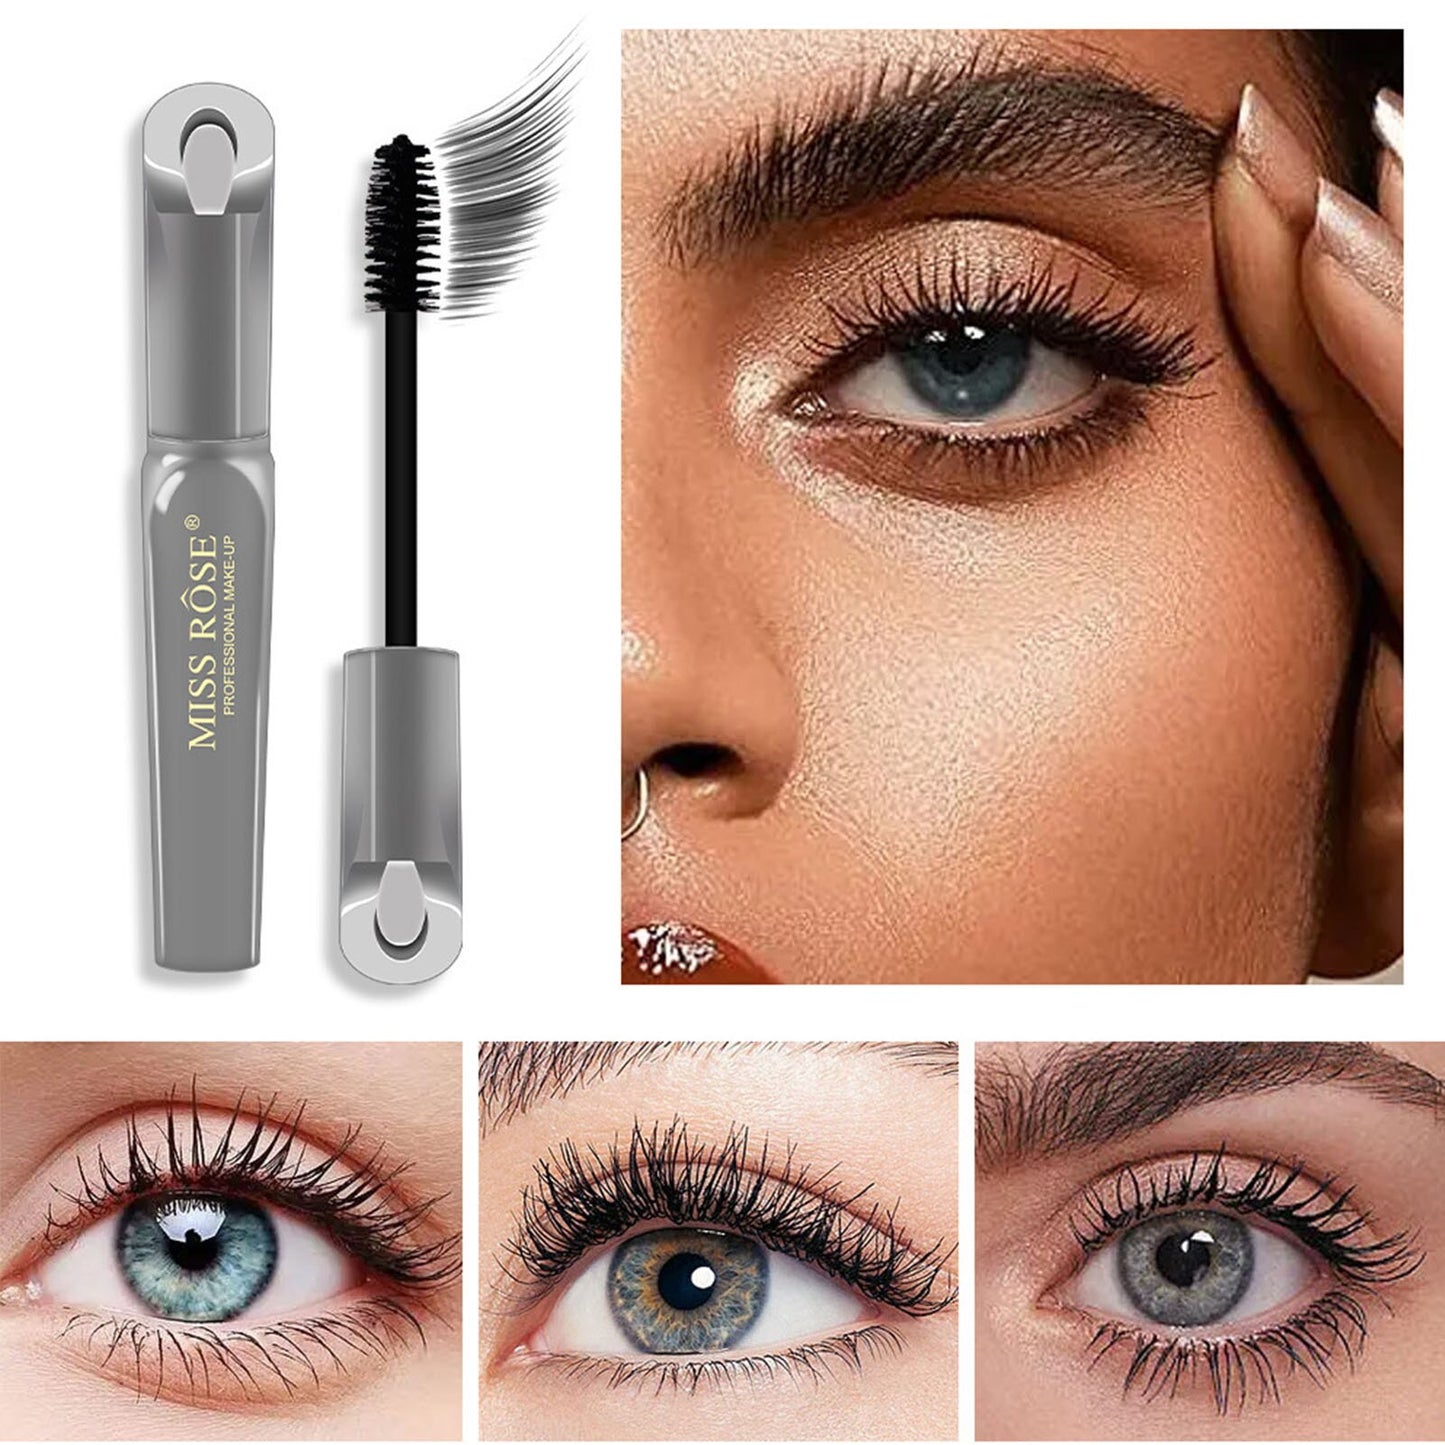 4D Silk Fiber Lashes Mascara Mascara Volume And Length Thickening Curling Lash Makeup For Women And Girls